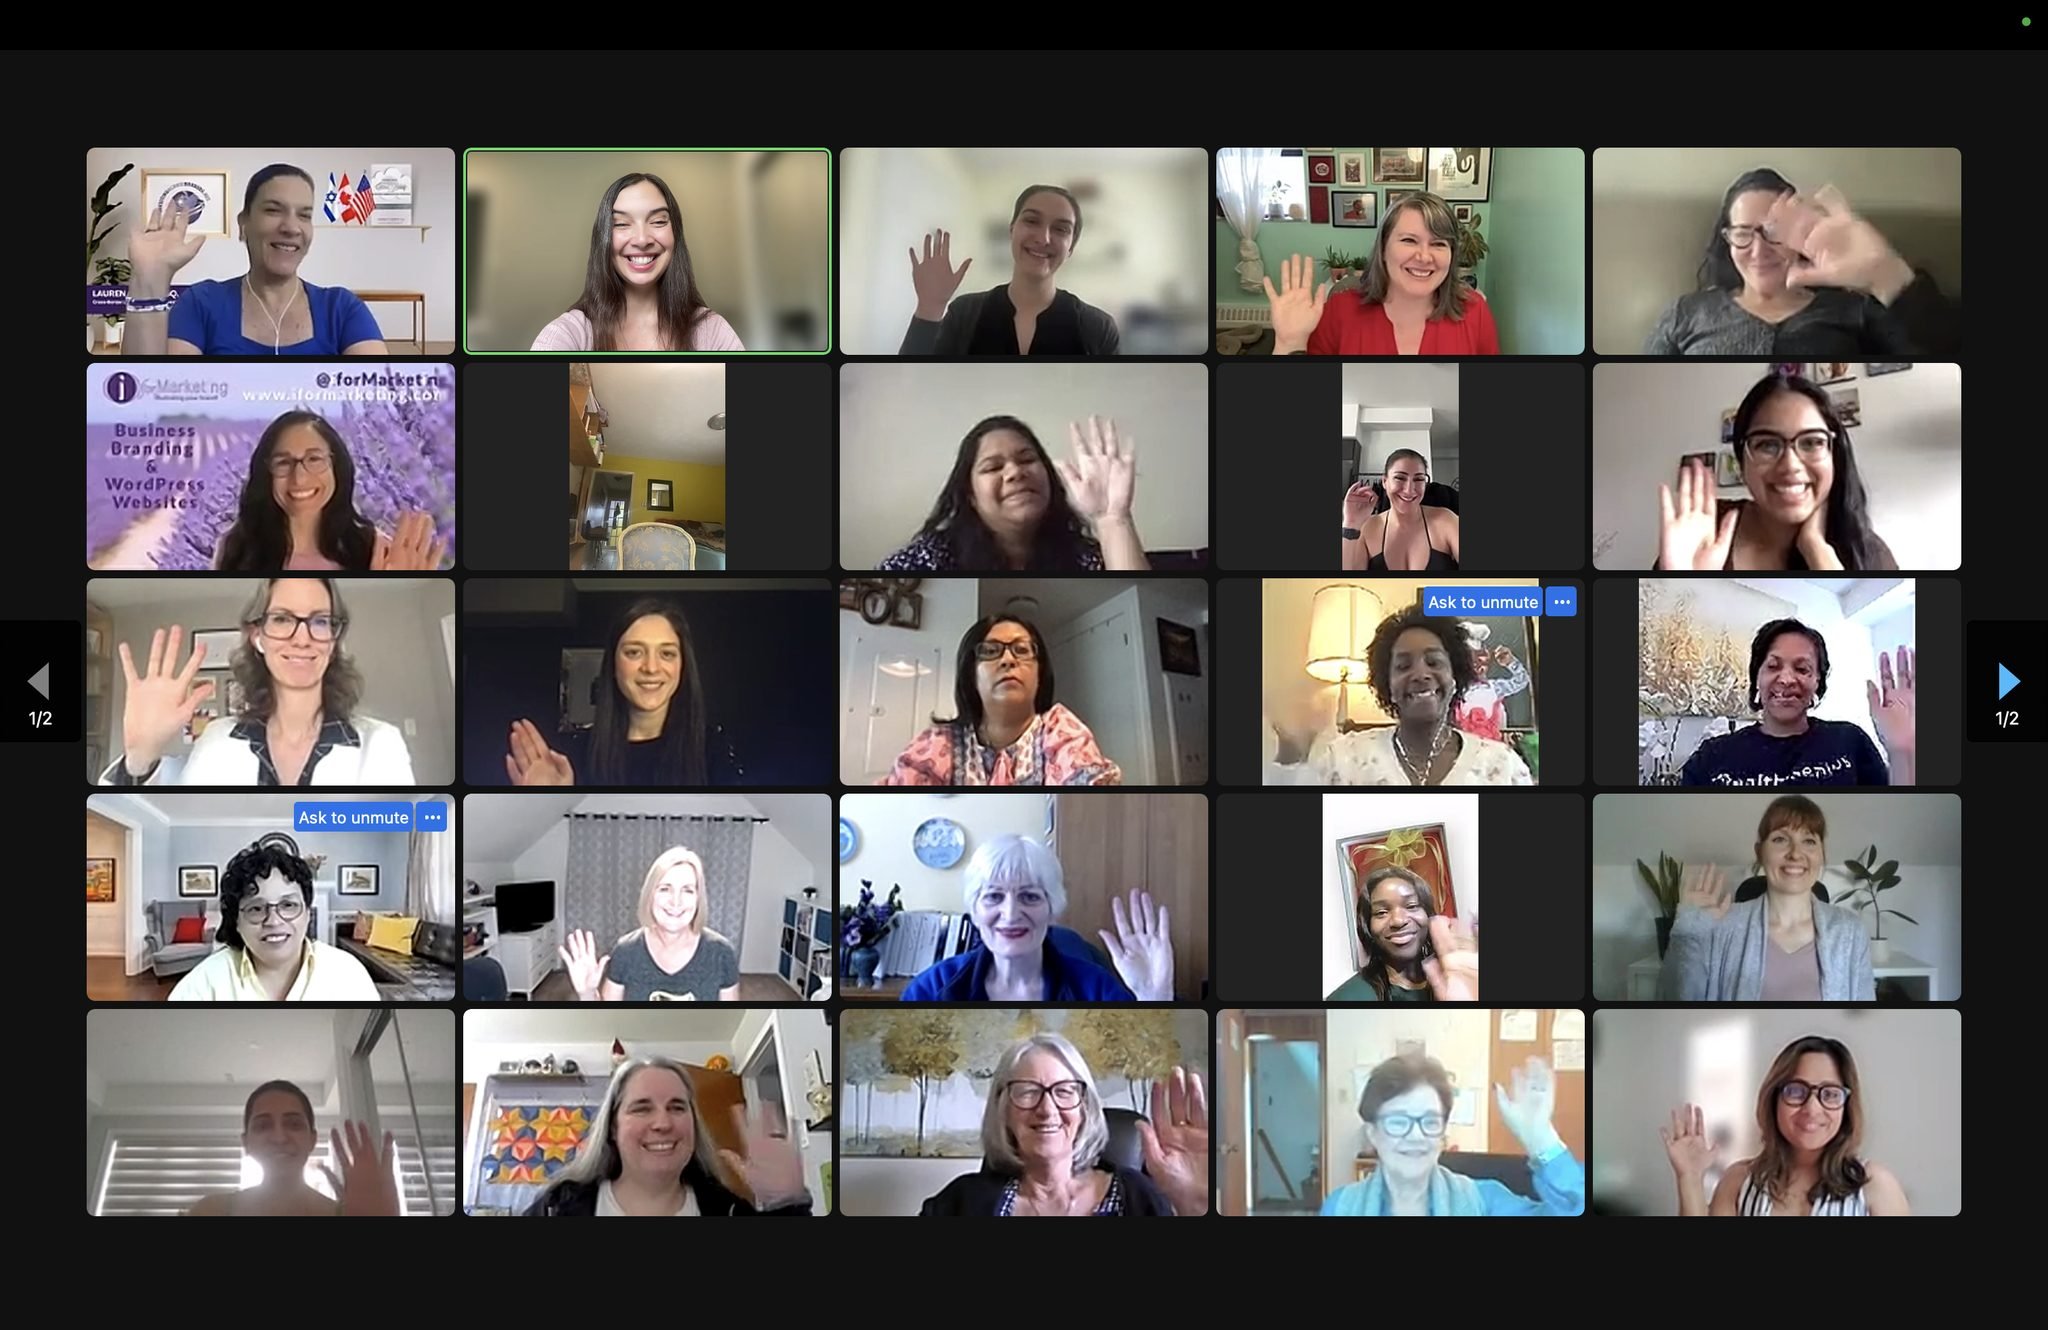 Wave hello to the FUTURE of networking! 👋 Virtual hangouts are making connections without borders POSSIBLE. Embrace technology and join the revolution - because who says you can't meet inspiring minds from the comfort of your PJ's? 🚀💻 #NetworkingE